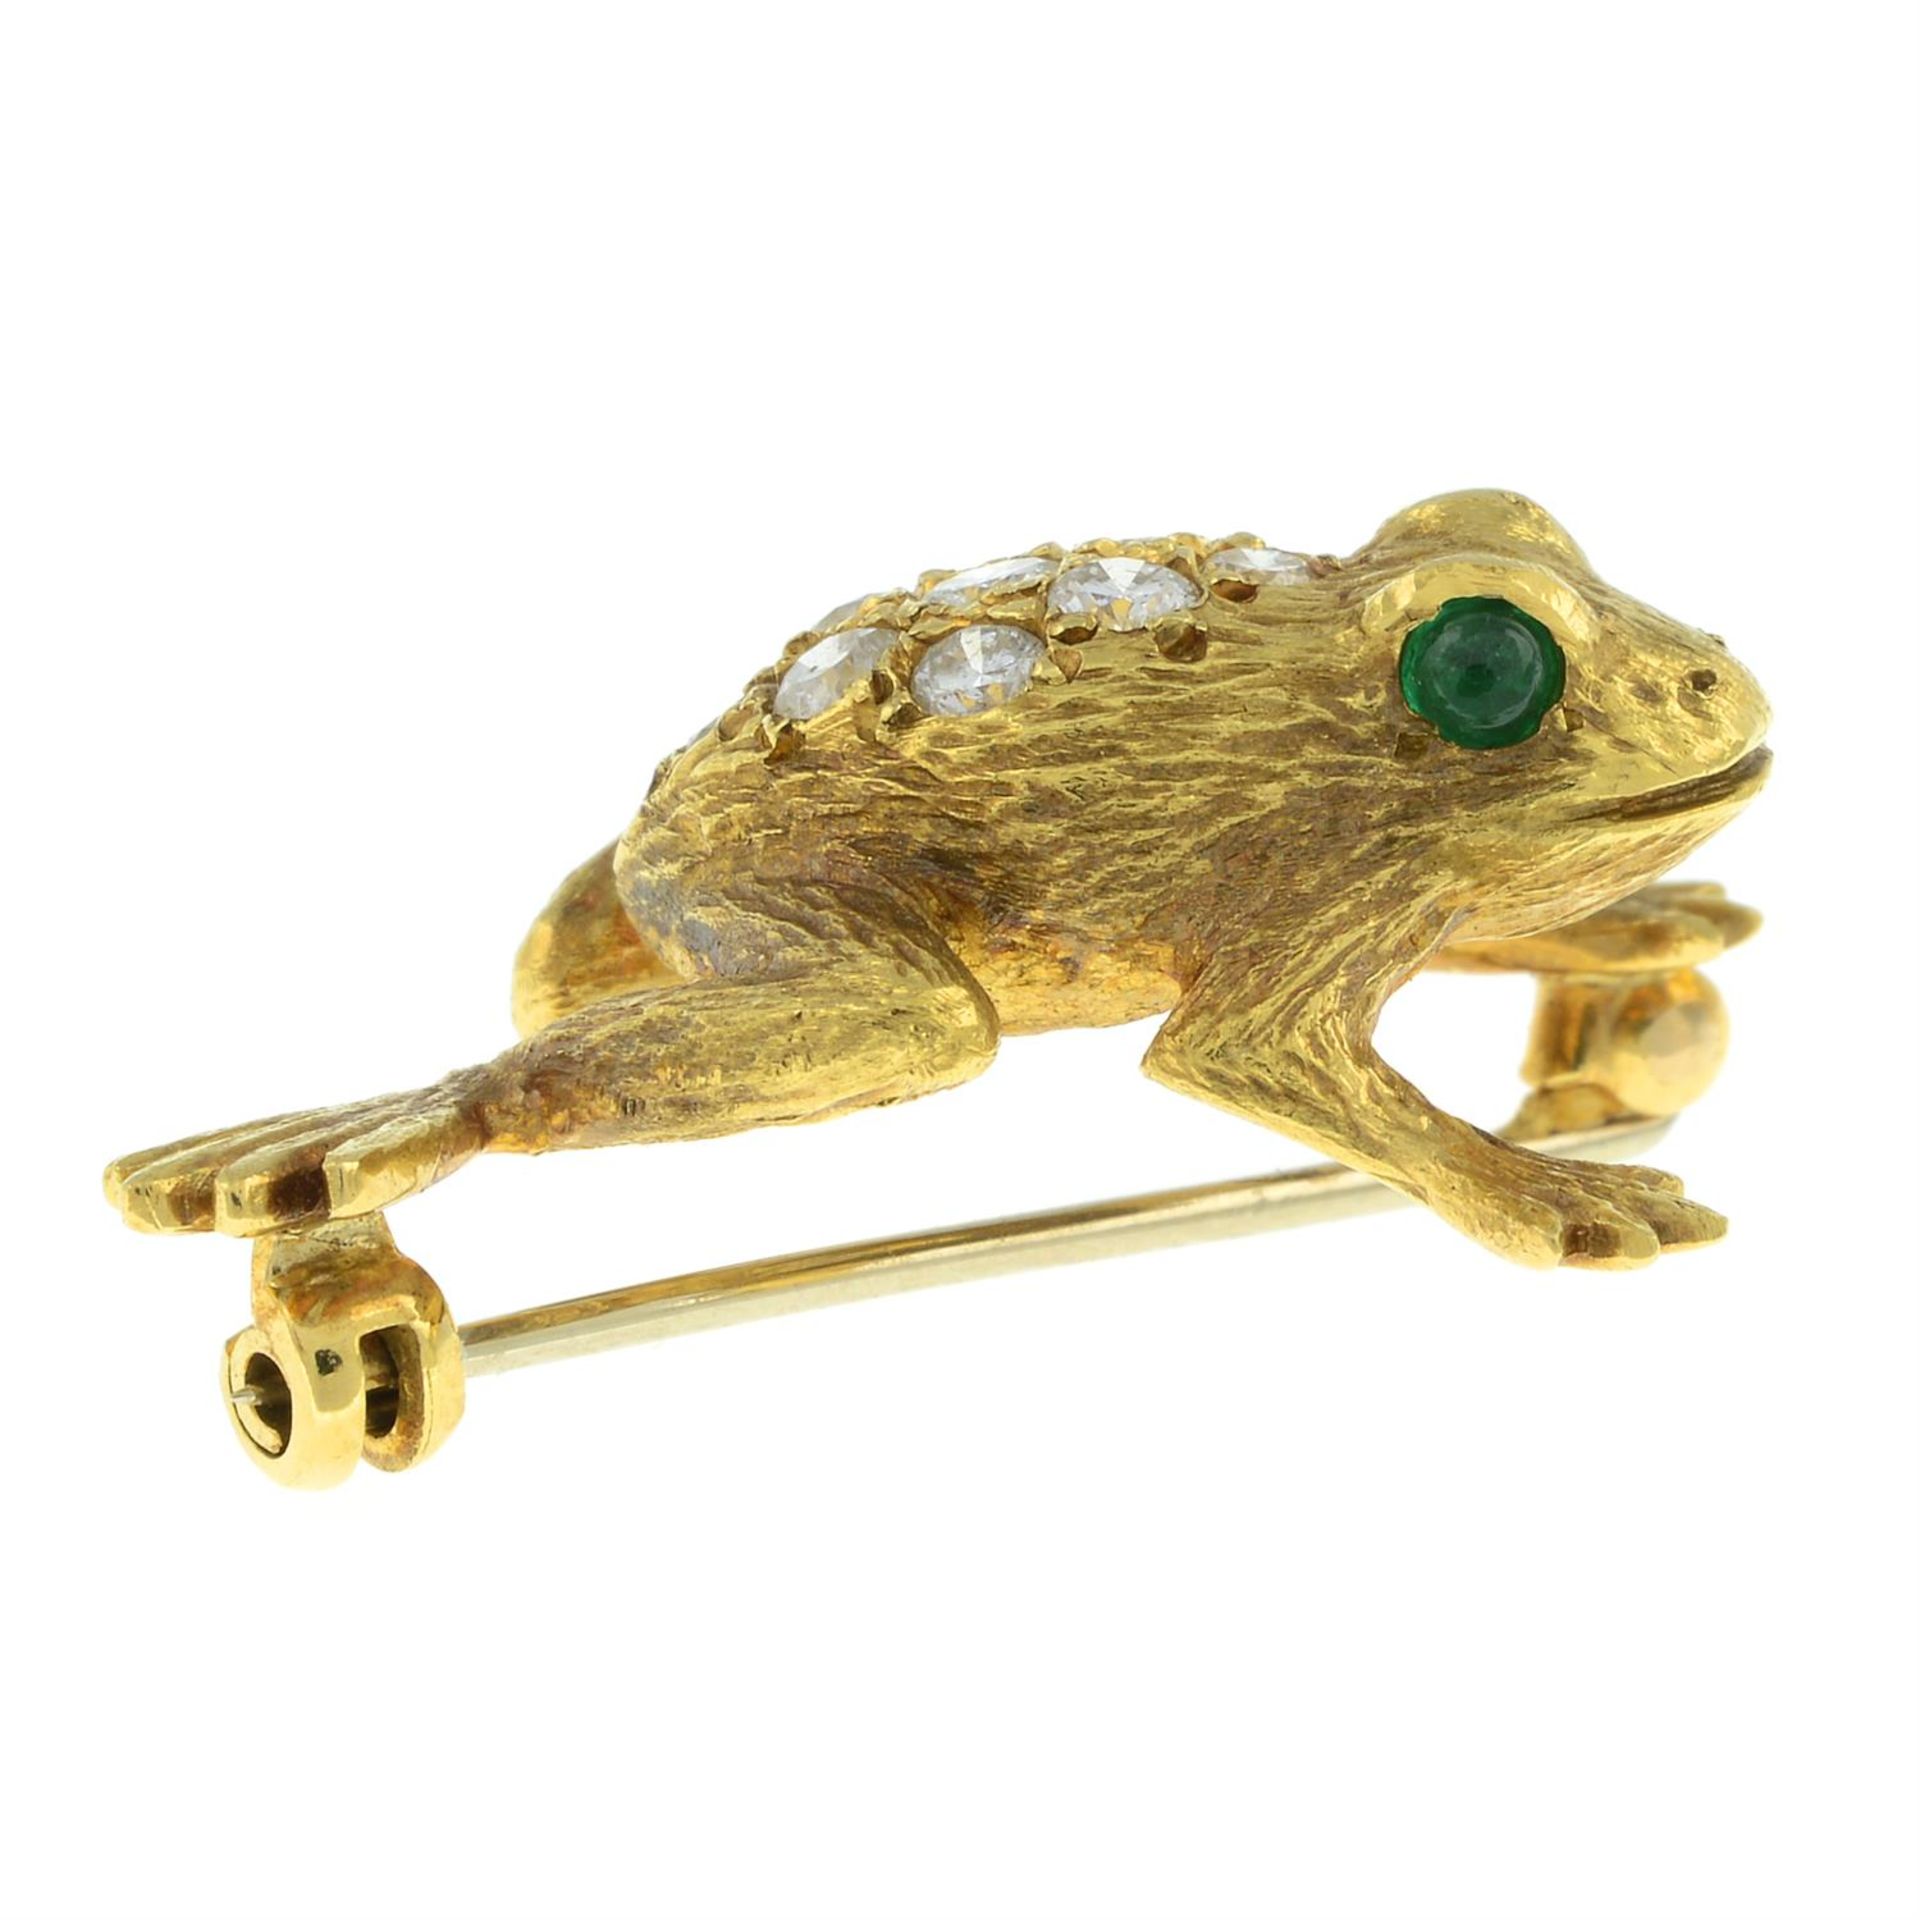 18ct gold diamond frog brooch, by E. Wolfe & Co. - Image 4 of 5